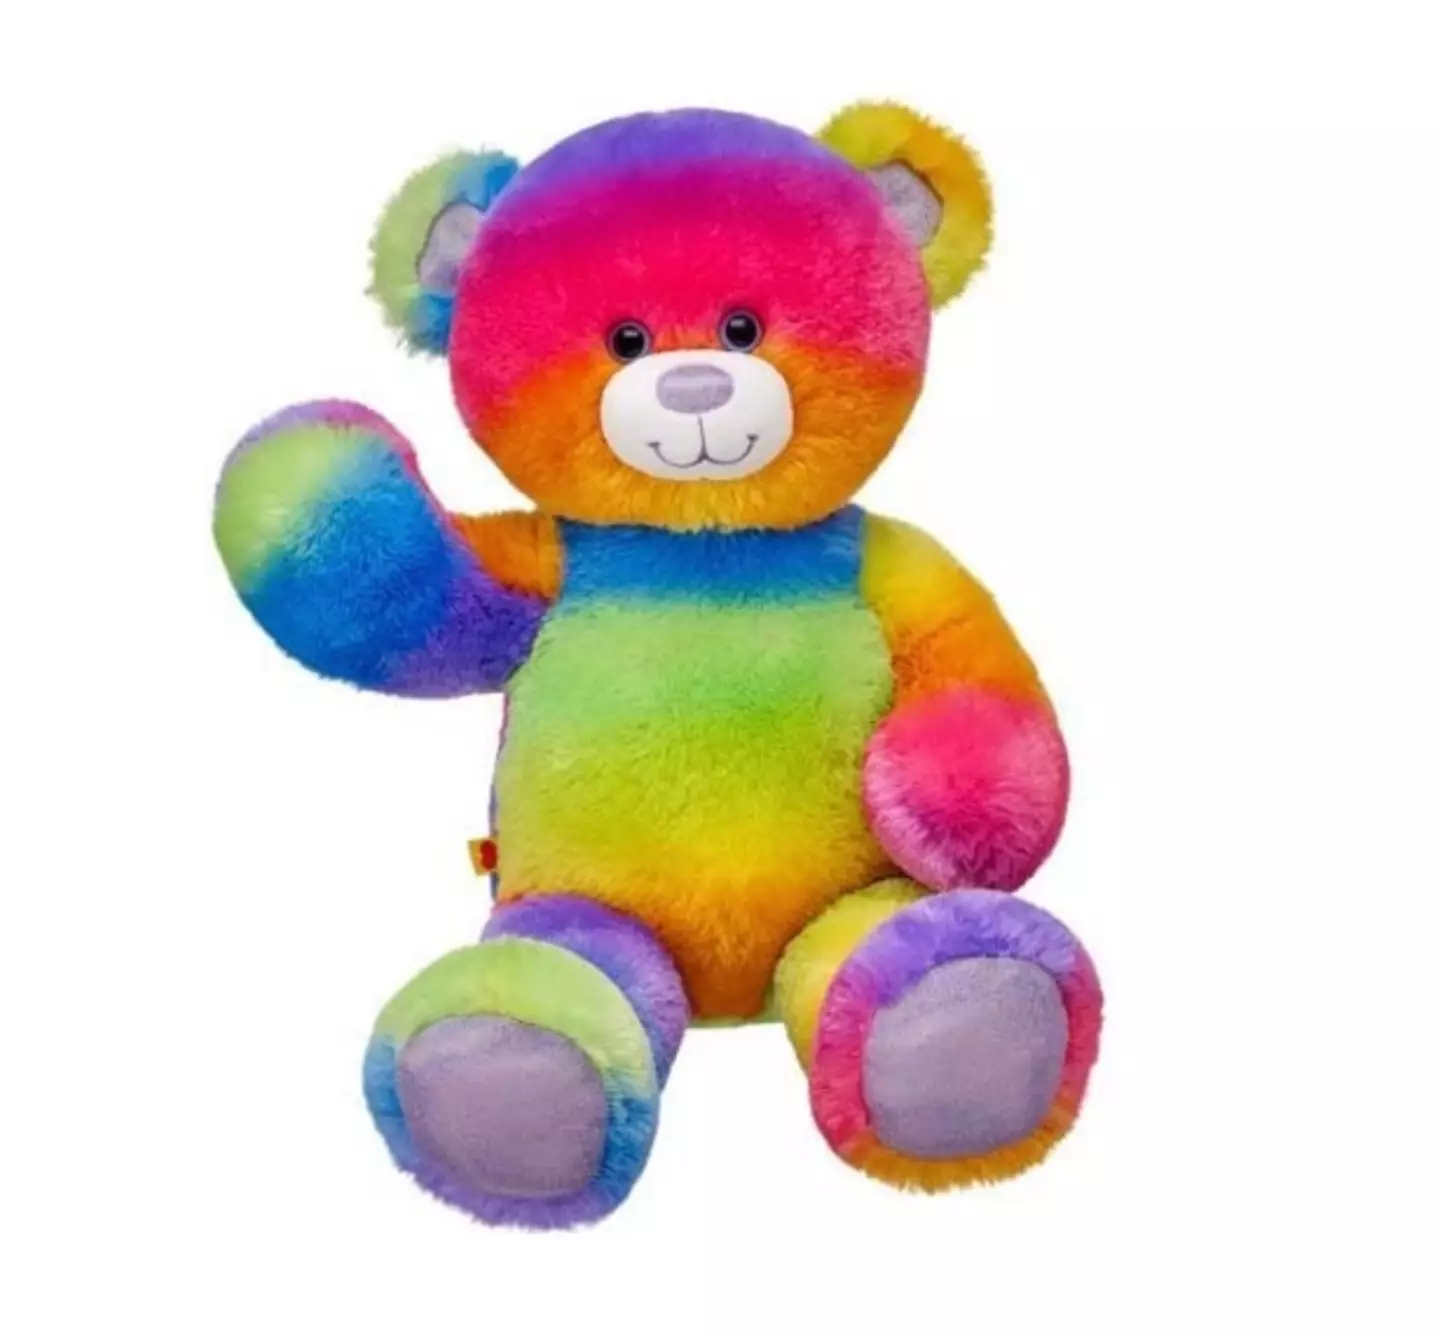 The lost bear looks similar to this.